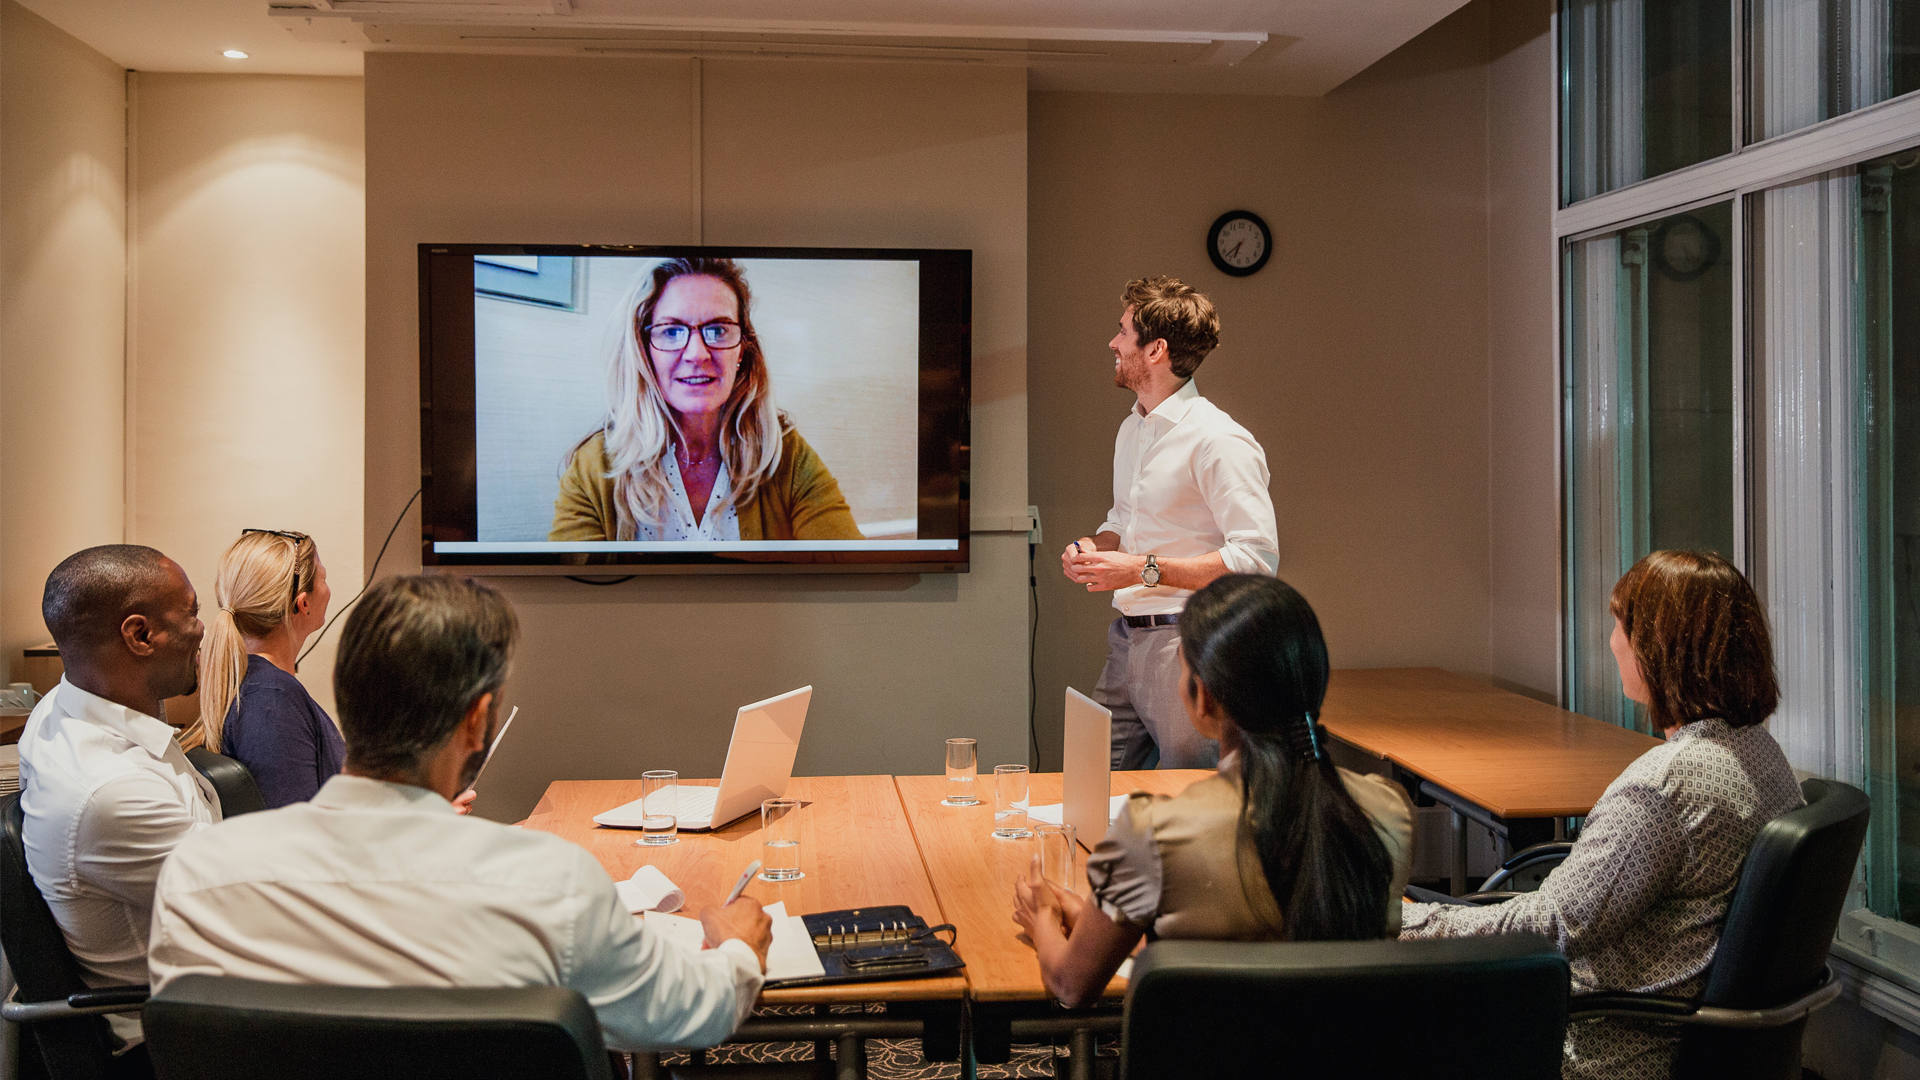 Handy AV | Video Conferencing Solutions Provider | Unified Communications